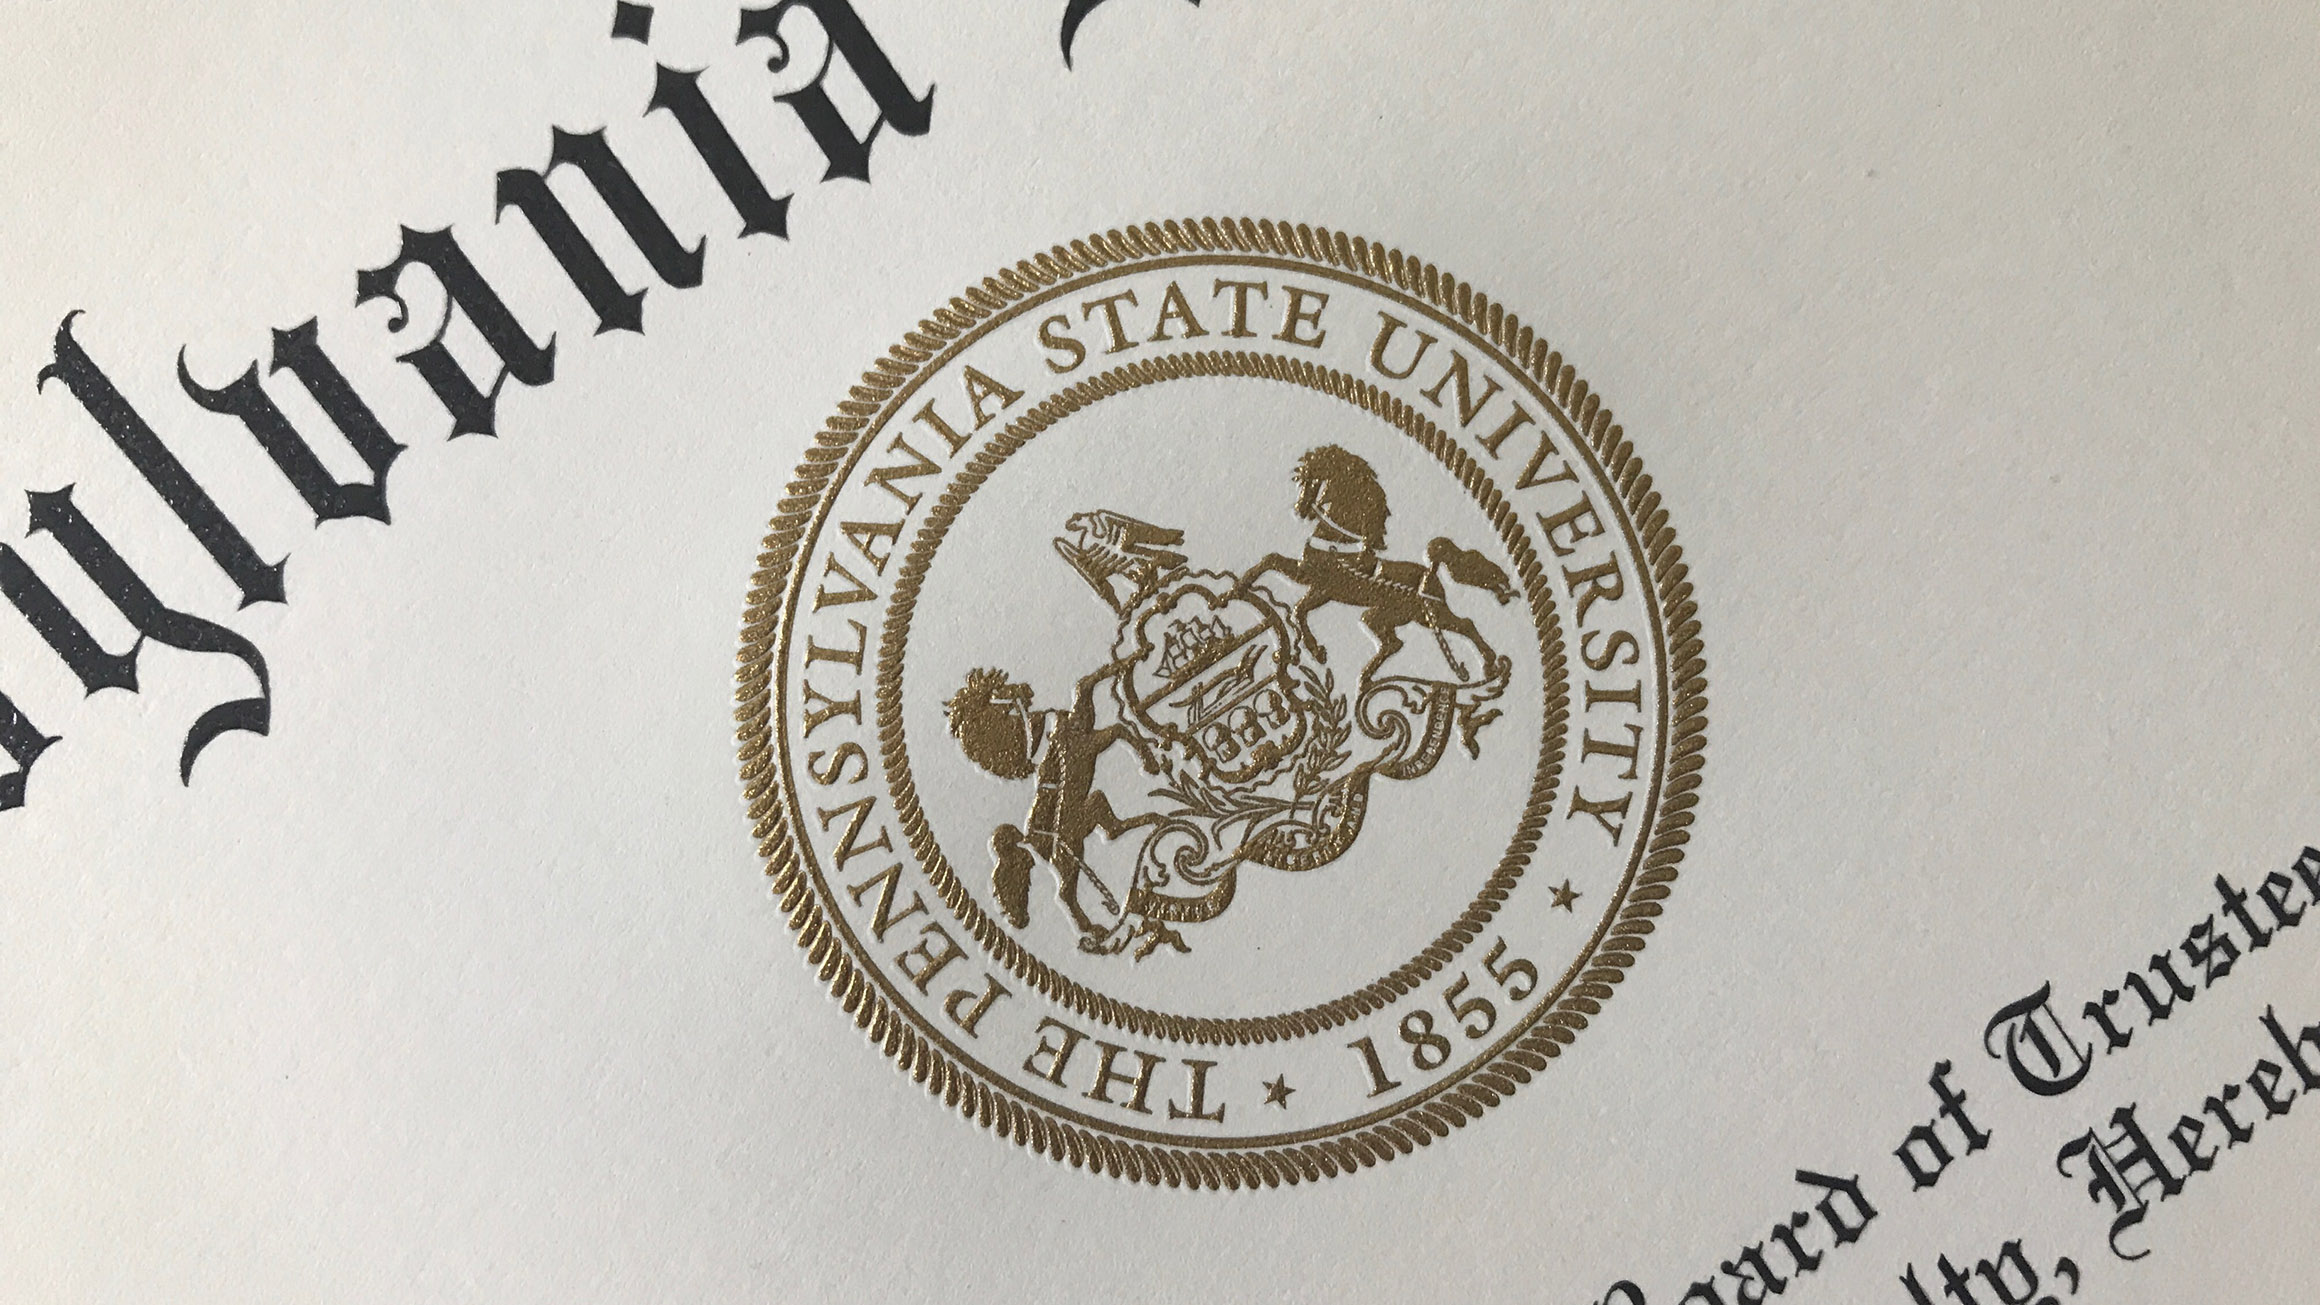 the Penn State seal is shown on a diploma